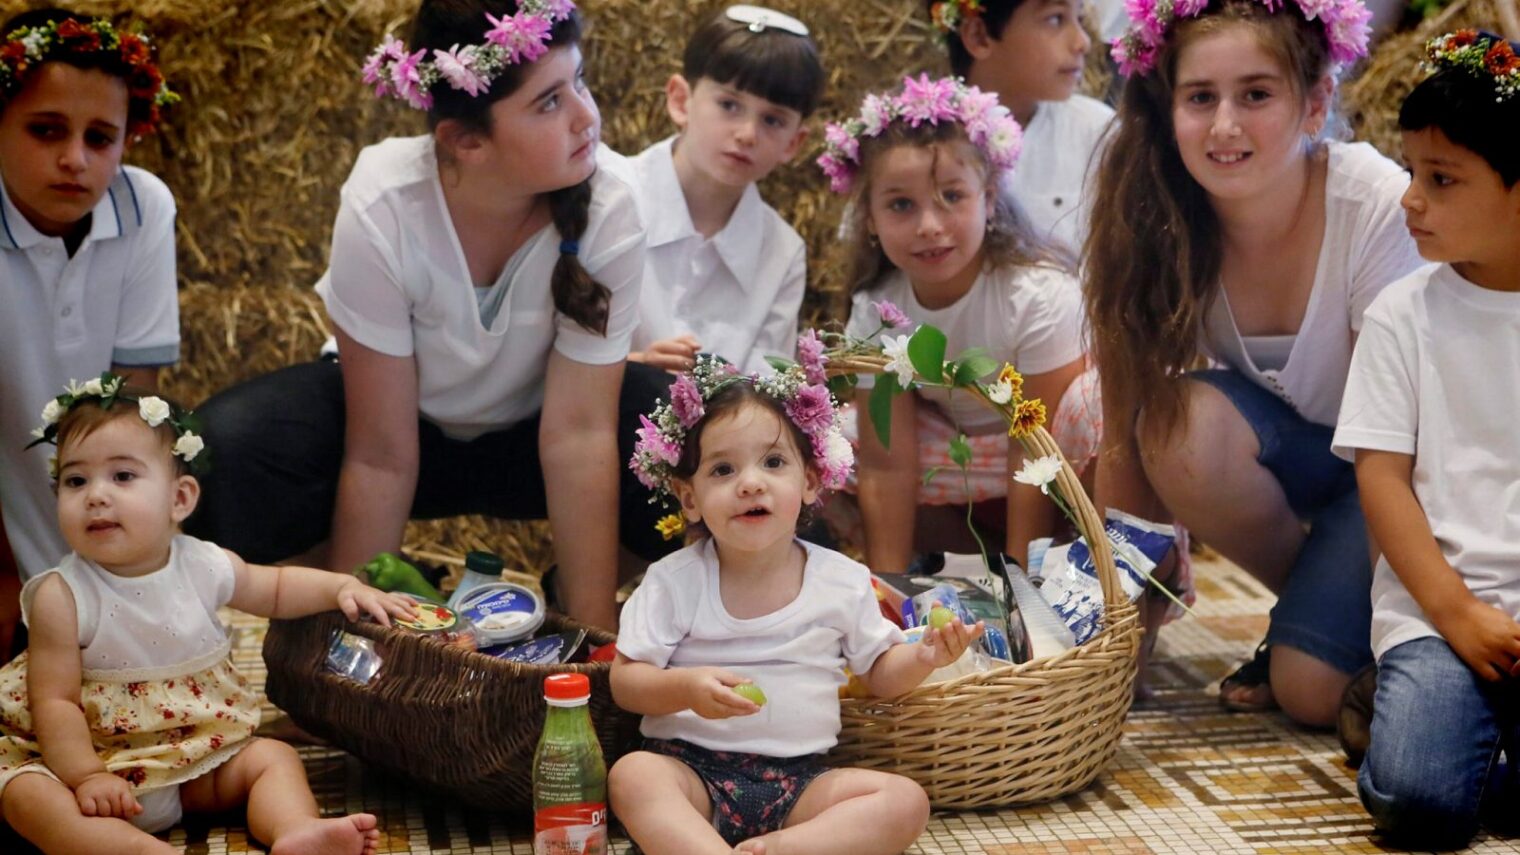 Children of dairy farmers celebrate Shavuot in Jerusalem with crowns of flowers on their heads. Photo by Miriam Alster/Flash90